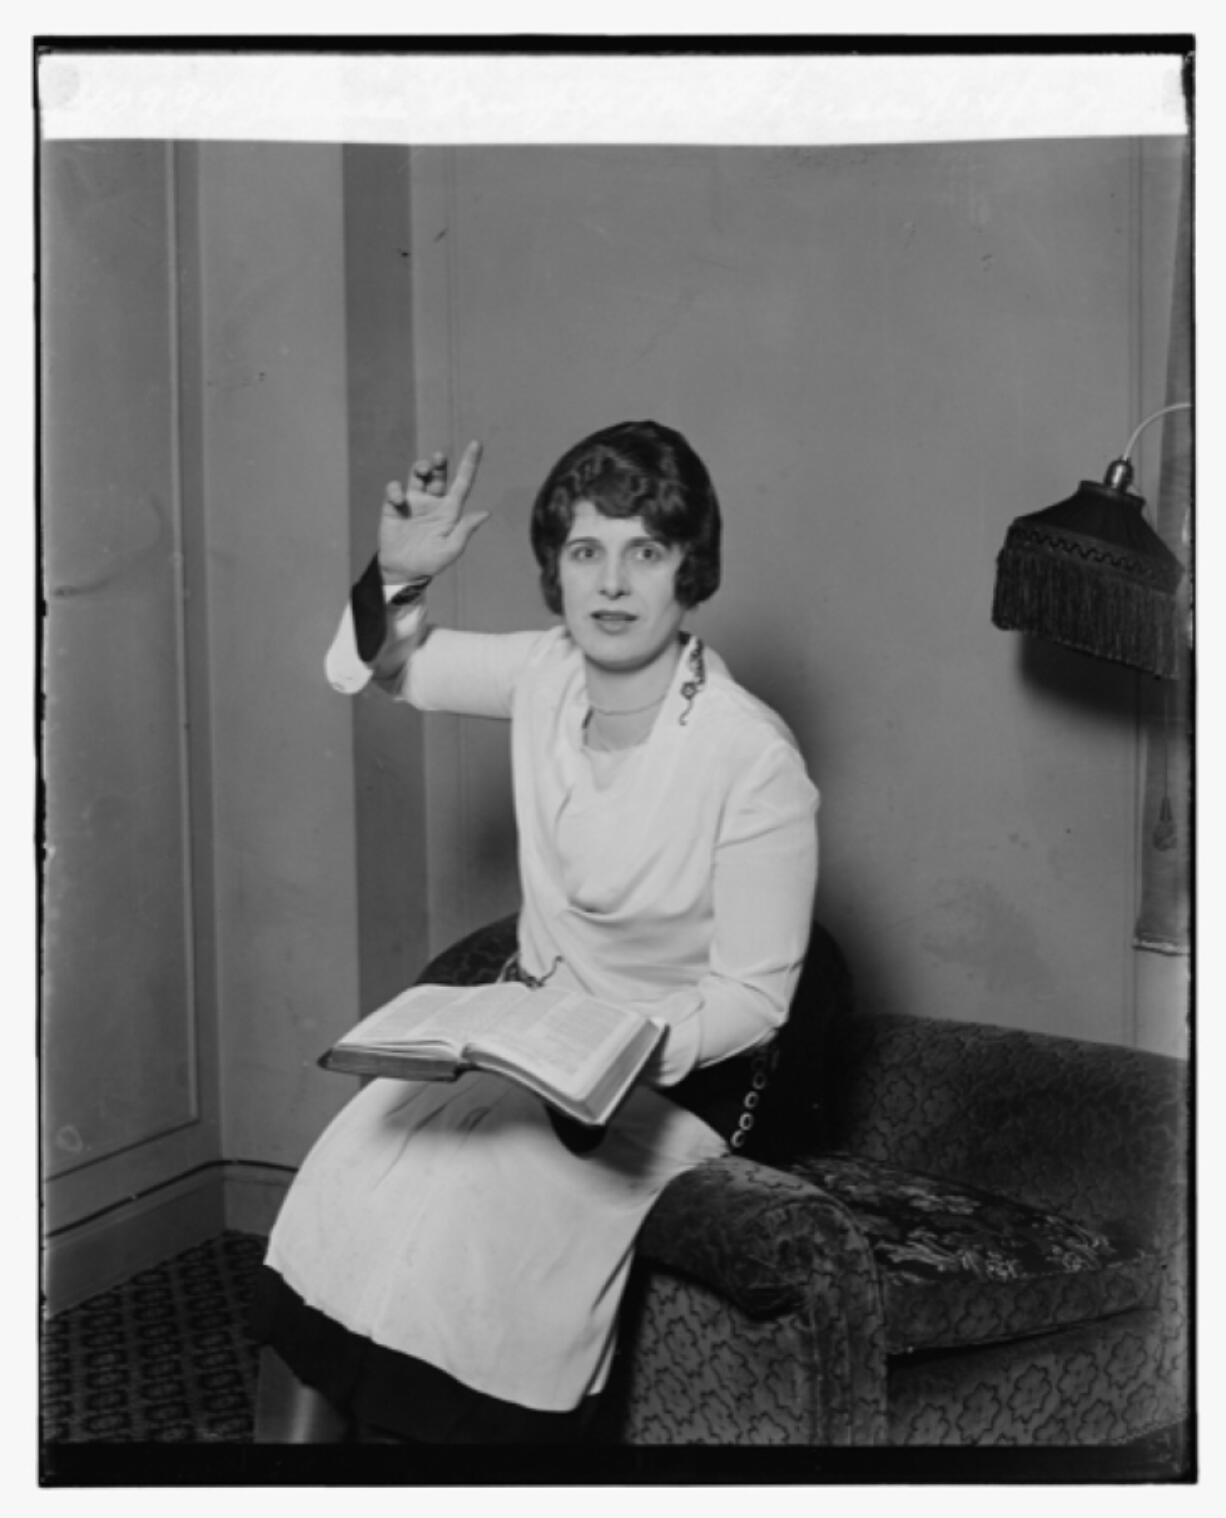 Largely unknown today, Aimee Semple McPherson, born Aimee Kennedy in 1890, was the most widely known evangelist between 1915 and her death in 1944. Founder of the Four-Square Gospel Church, she was a complex individual. While her views were markedly progressive on religion, she was strictly conservative in her worldview, something her personal life fell short of. Regardless, her notoriety helped earn women pastorships in American churches.